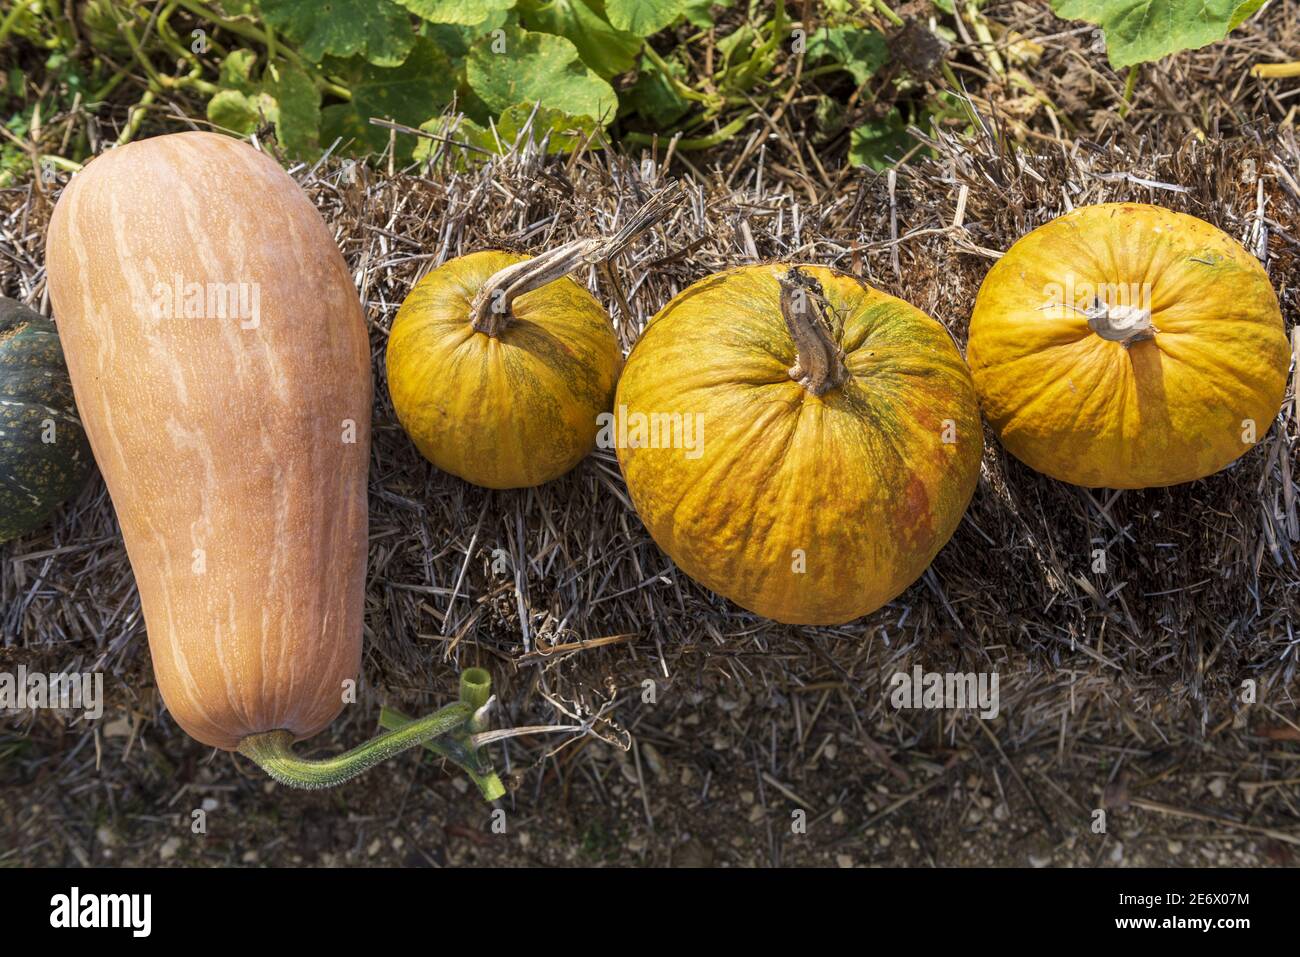 France, Indre et Loire, Chedigny, village garden, the only village in France to have the Jardin Remarquable label, the priest's garden, squash Stock Photo